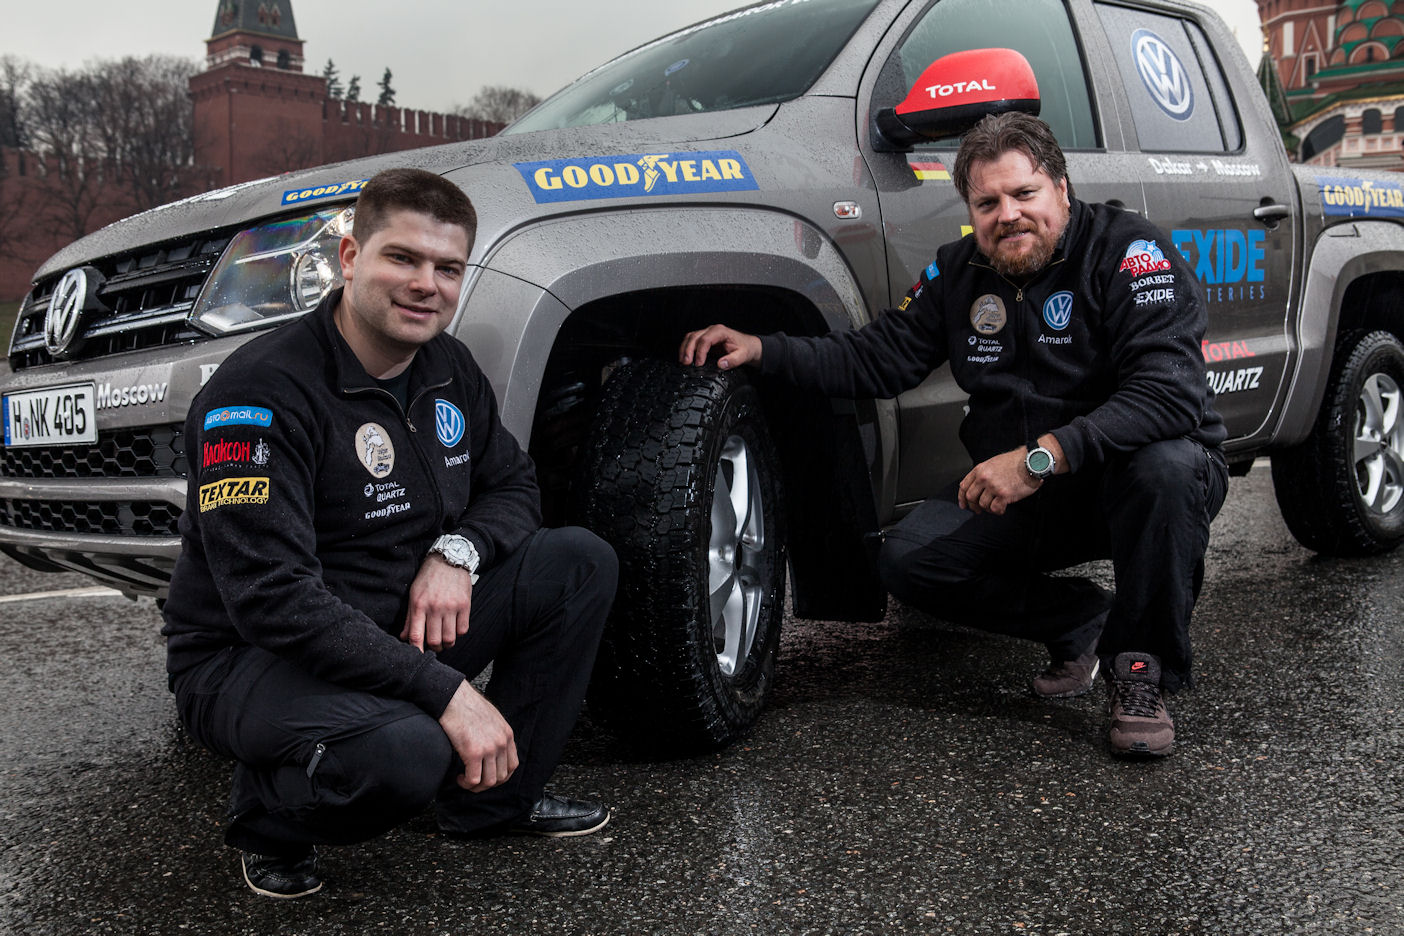 Zietlow selects latest Goodyear Wrangler tyres for Dakar-Moscow record attempt